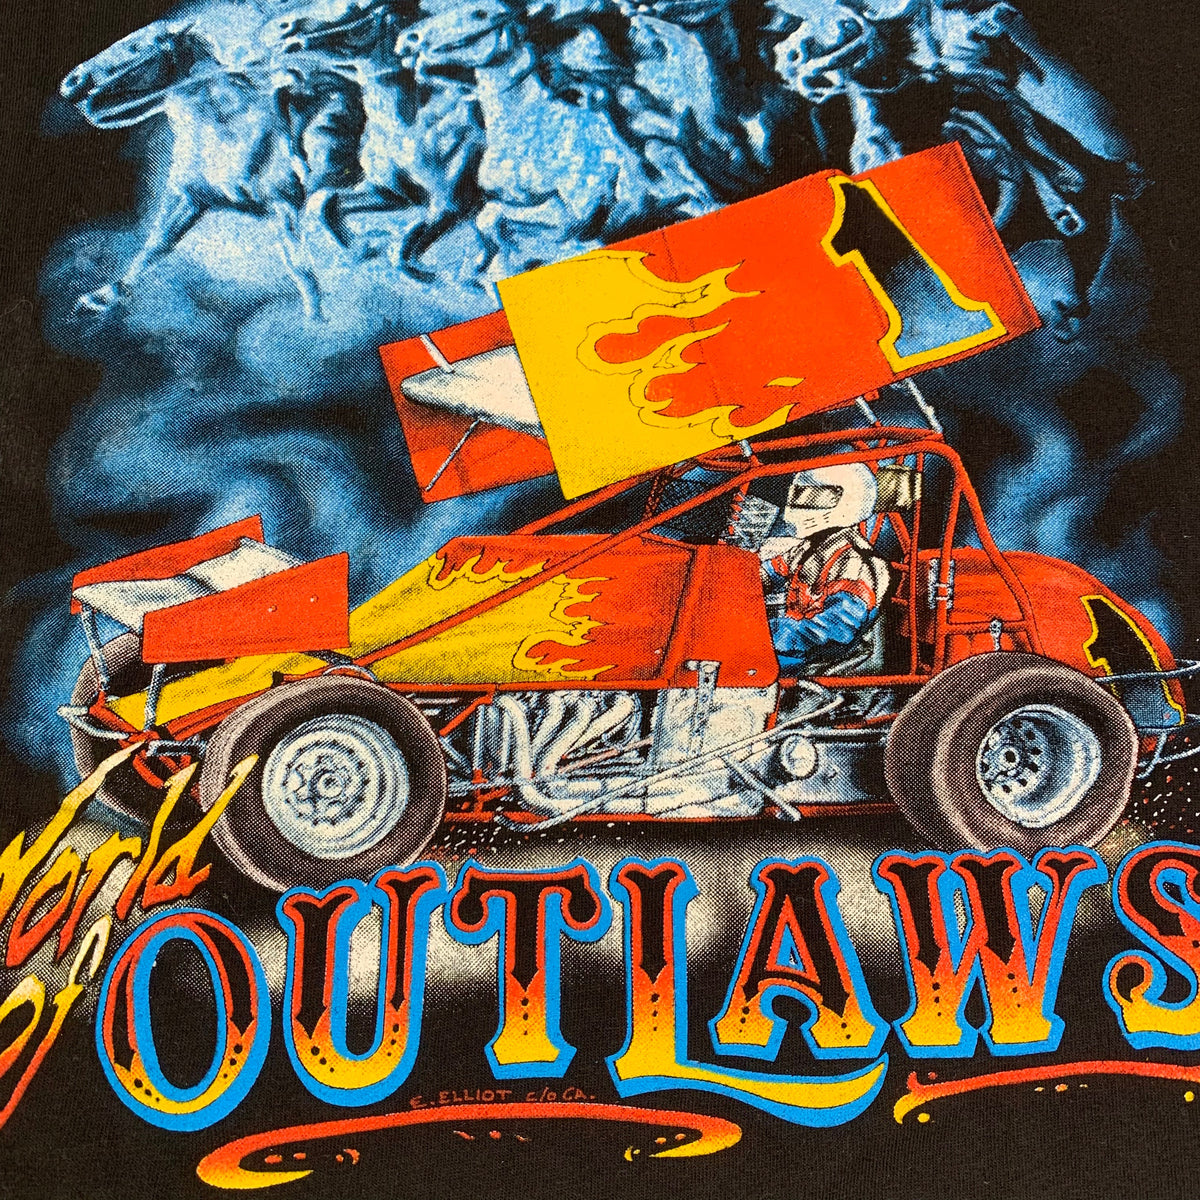 Vintage World Of Outlaws &quot;1990&quot; T-Shirt - jointcustodydc